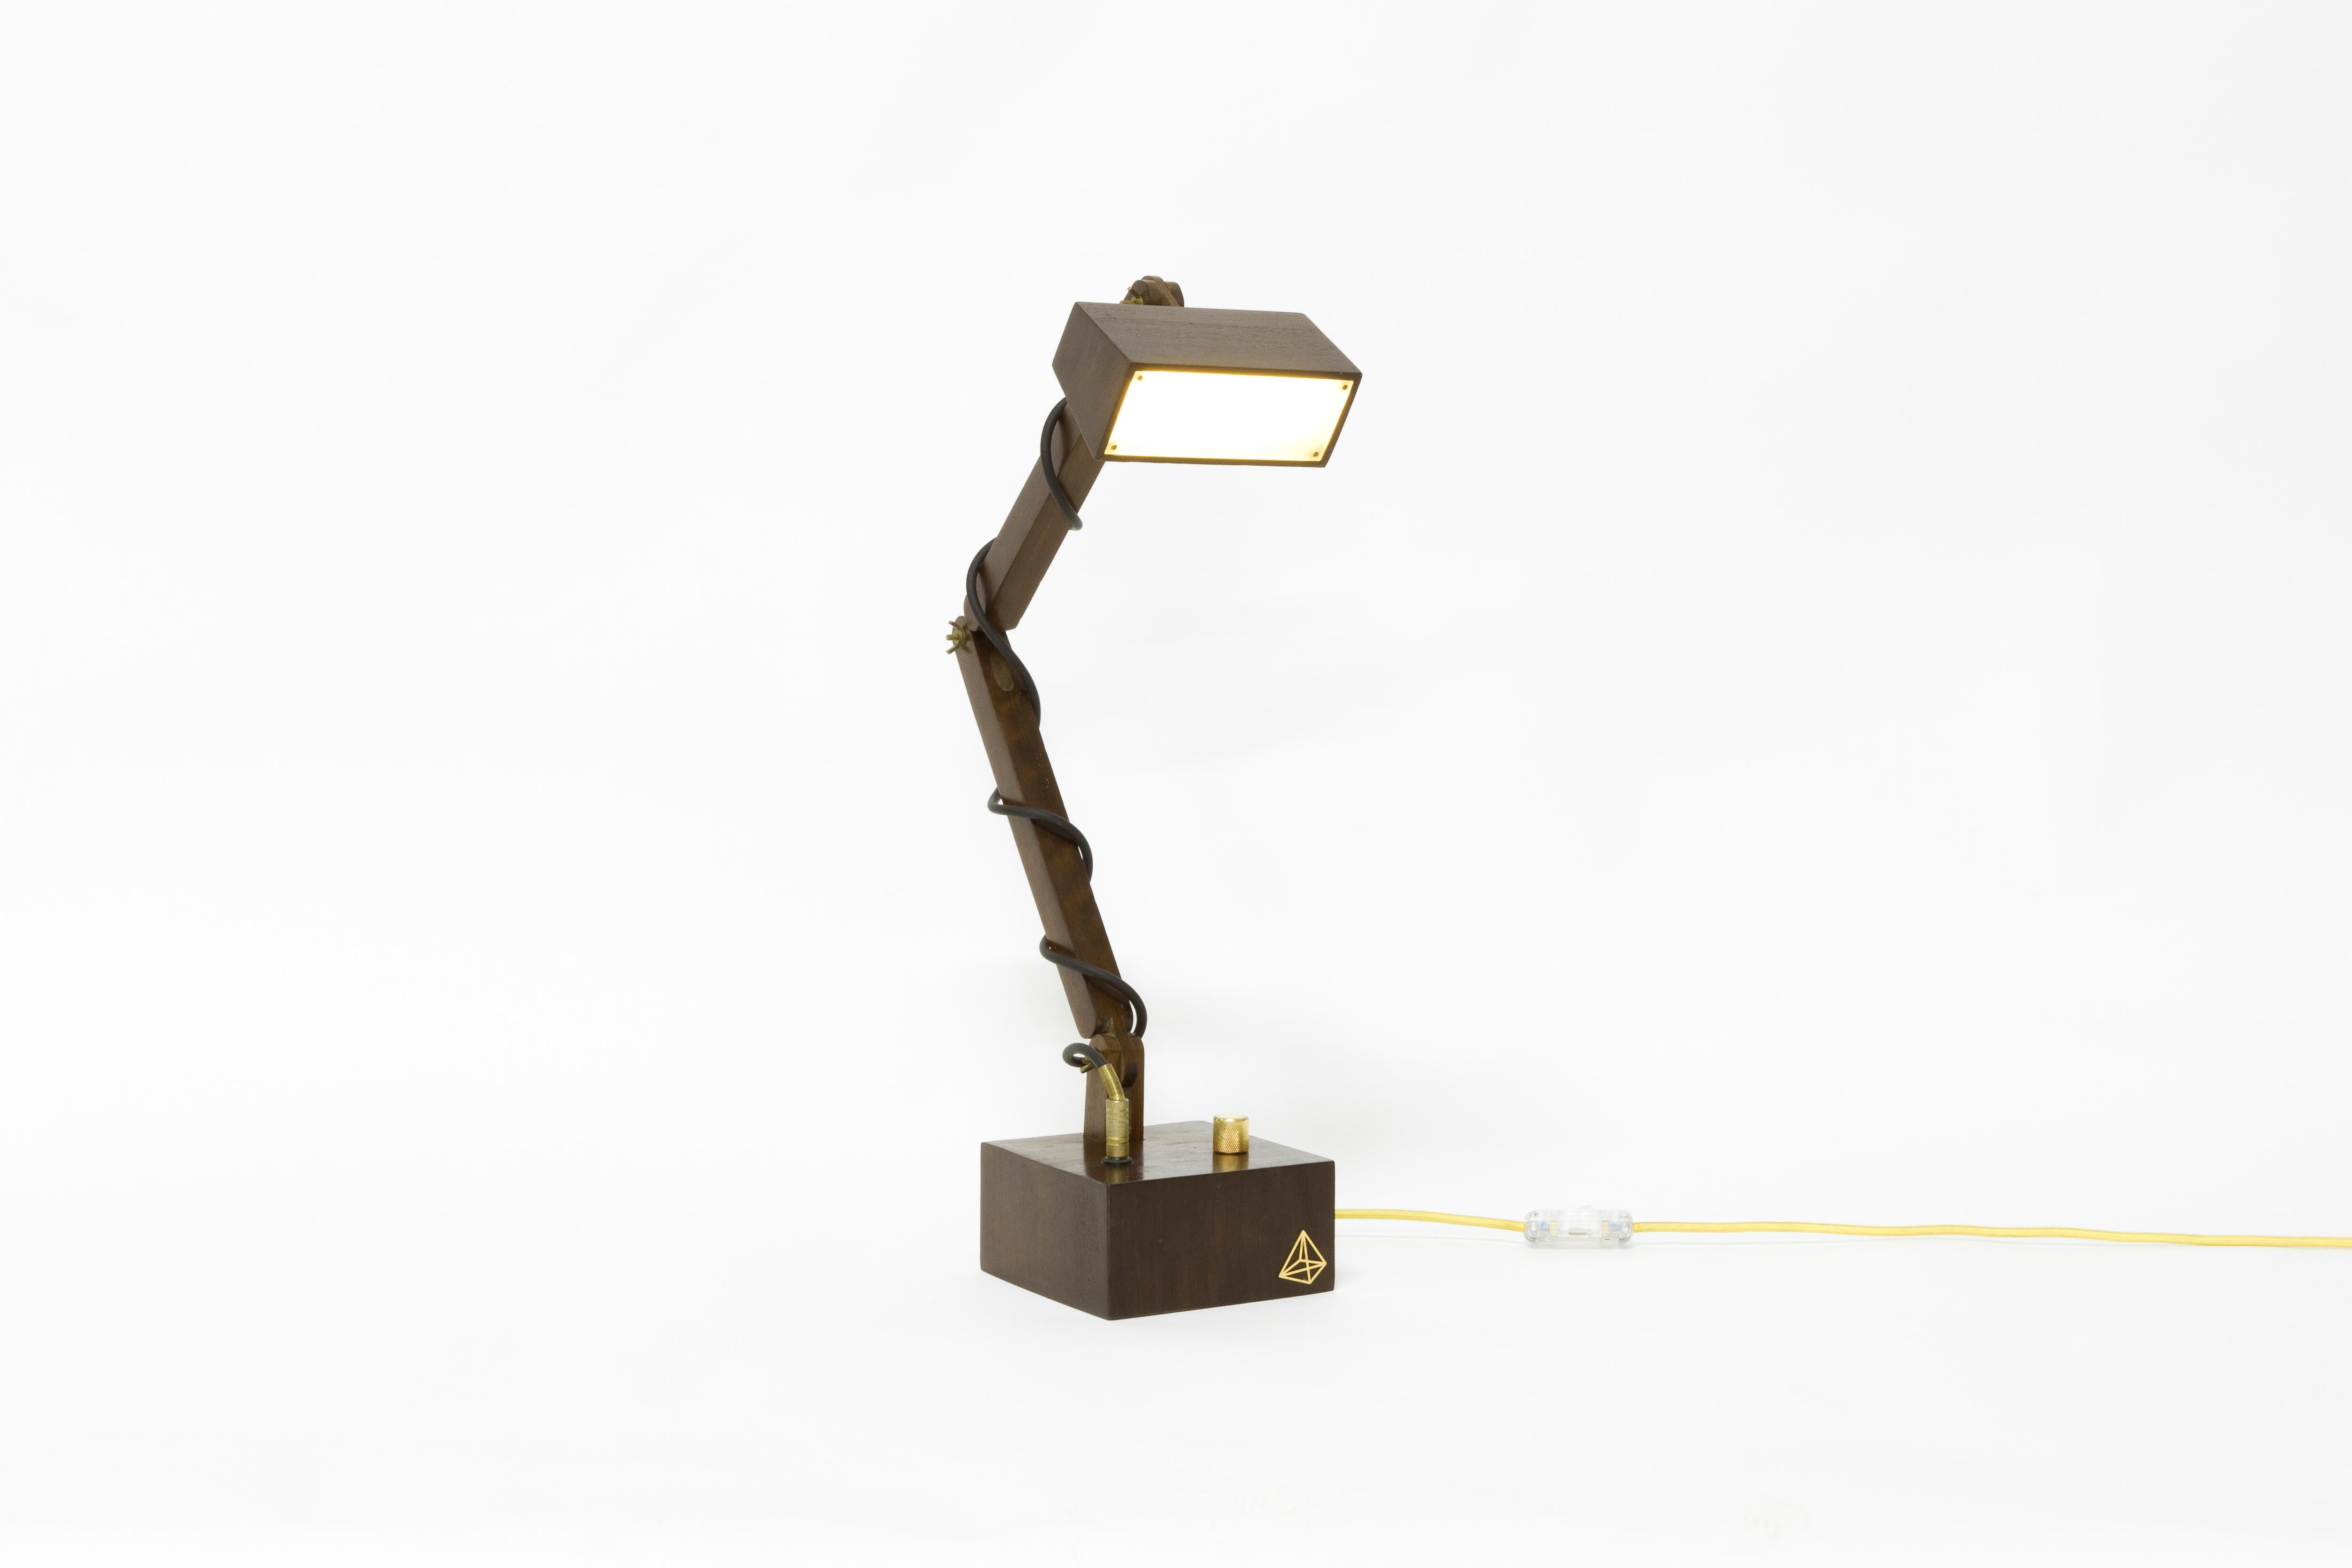 Reclaimed Wood Table Lamp in Dark Wood, Limited Edition Contemporary Design by O Formigueiro For Sale